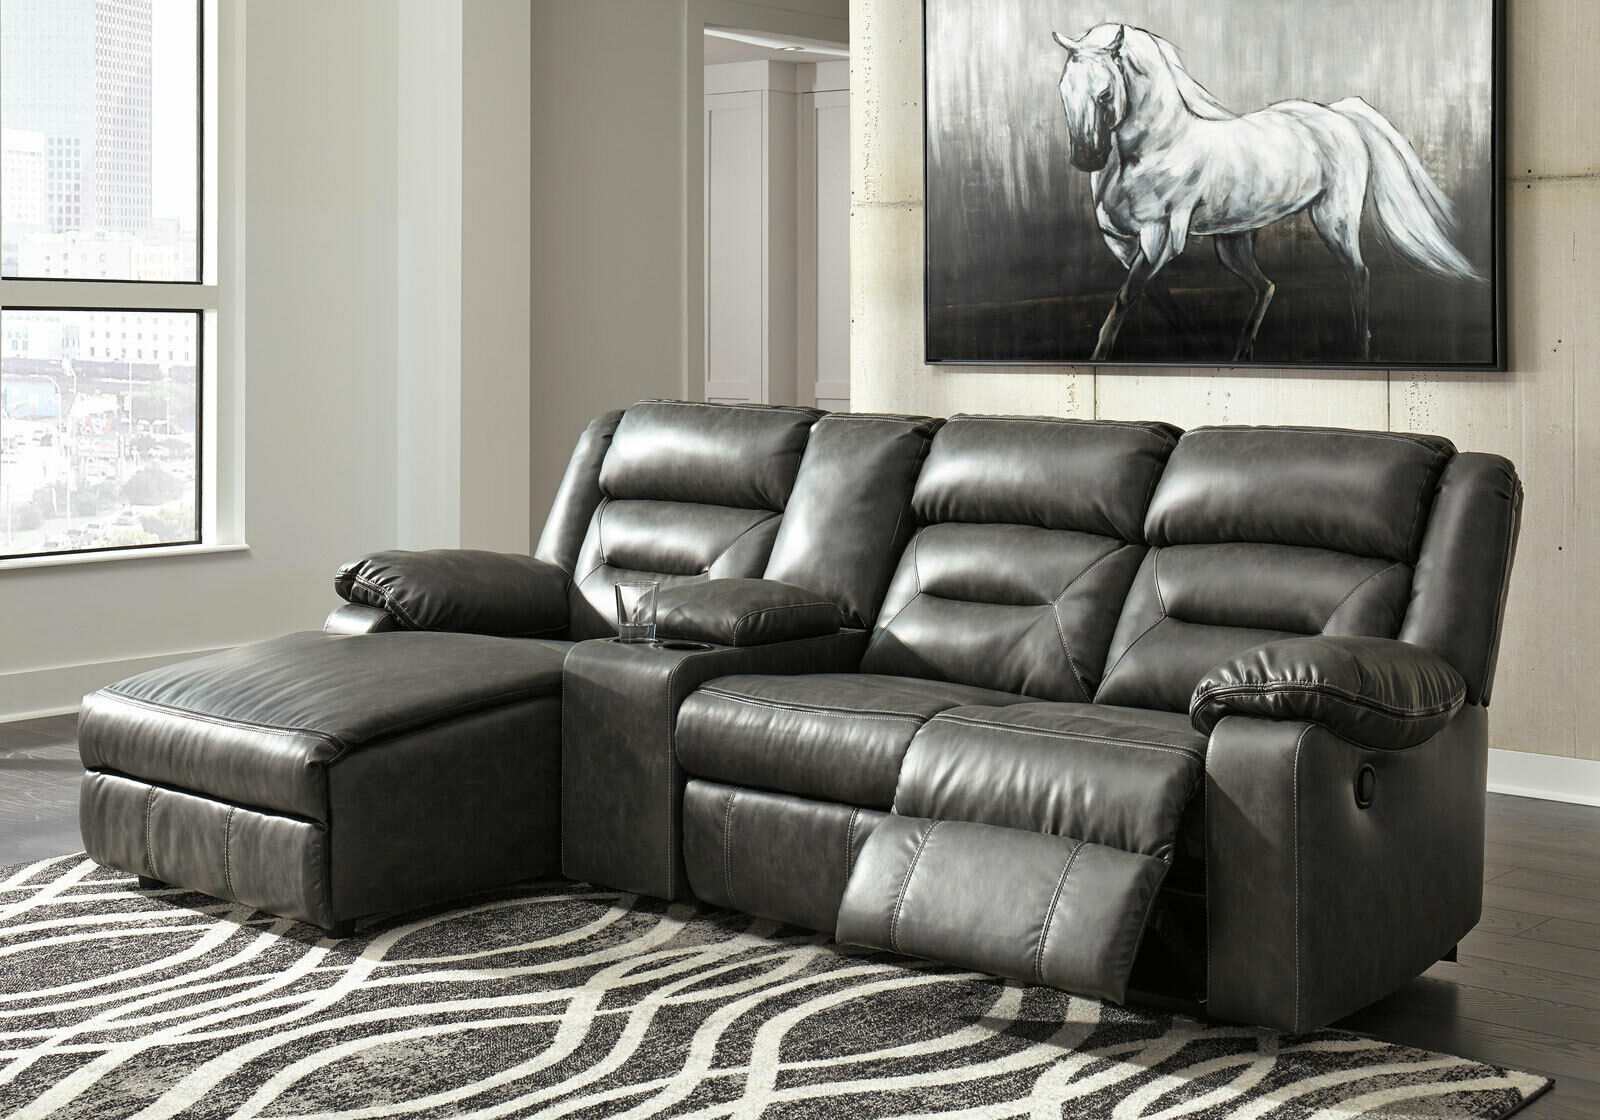 leather reclining chaise sofa